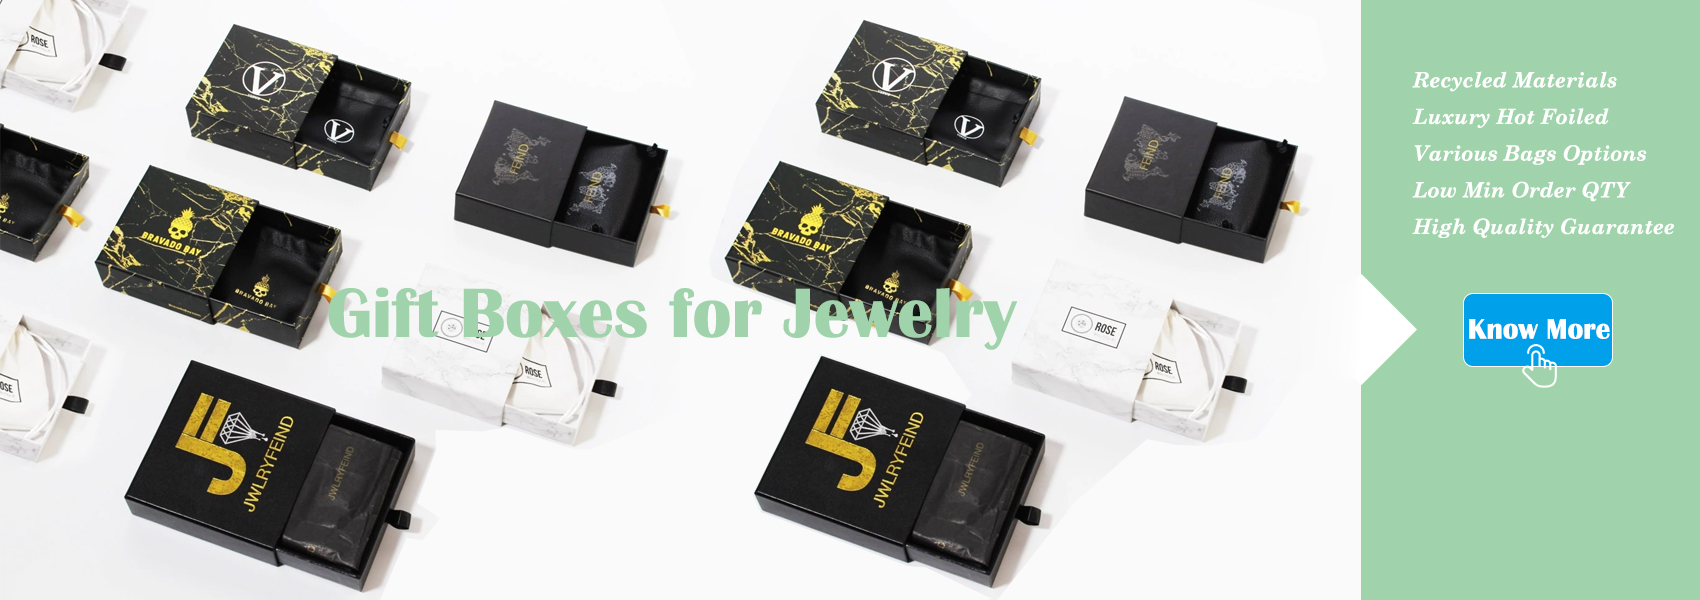 Gift Boxes for Jewelry | Shenzhen Zhibang Packaging and Printing Co.,Ltd